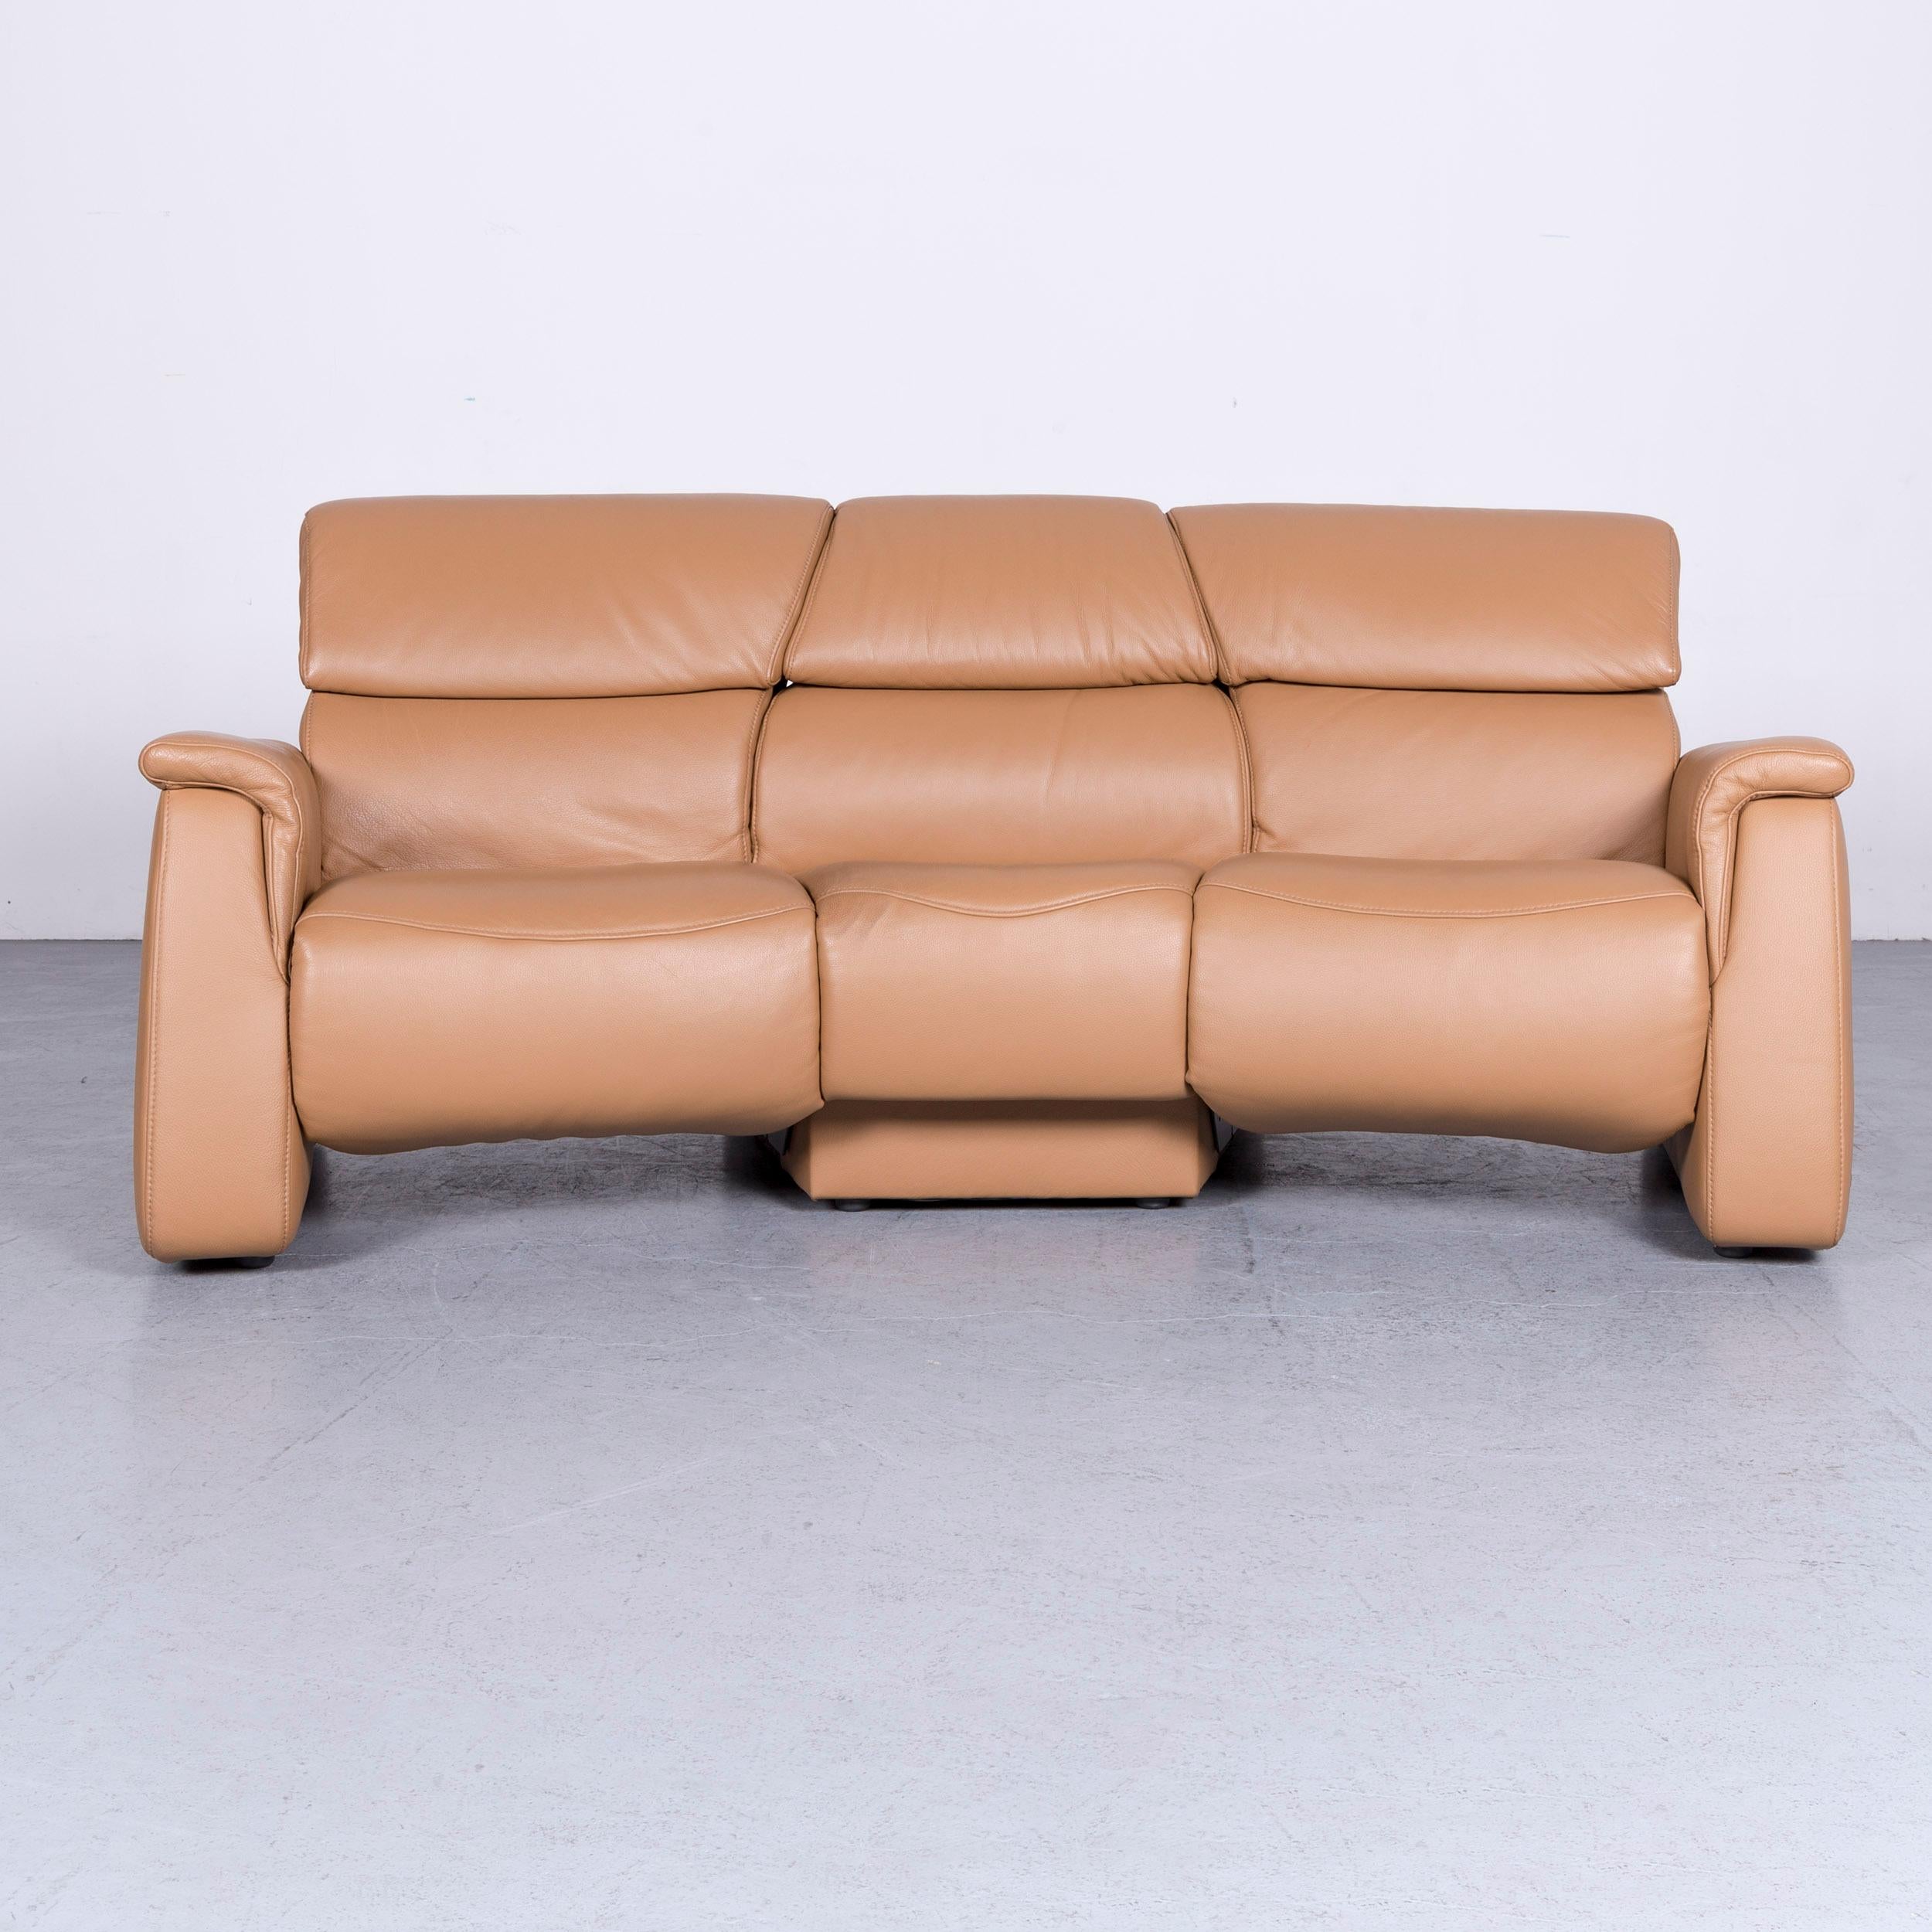 We bring to you a Himolla designer sofa beige three-seat couch recliner function.